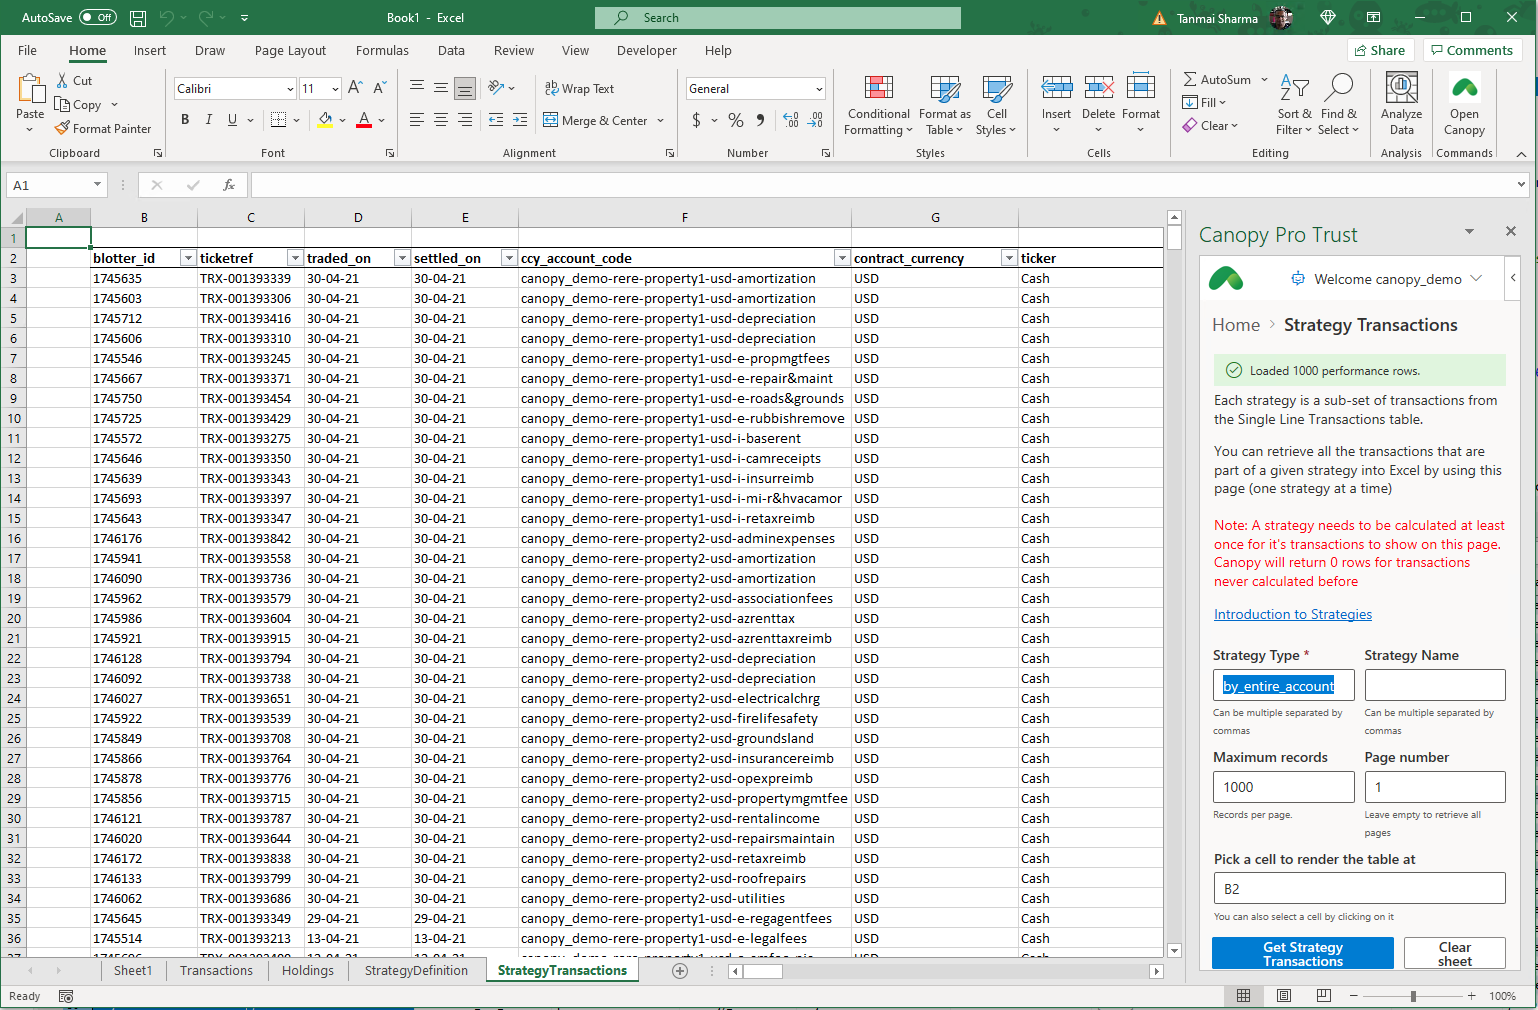 Strategy Transactions as retrieved from the Excel Add-in